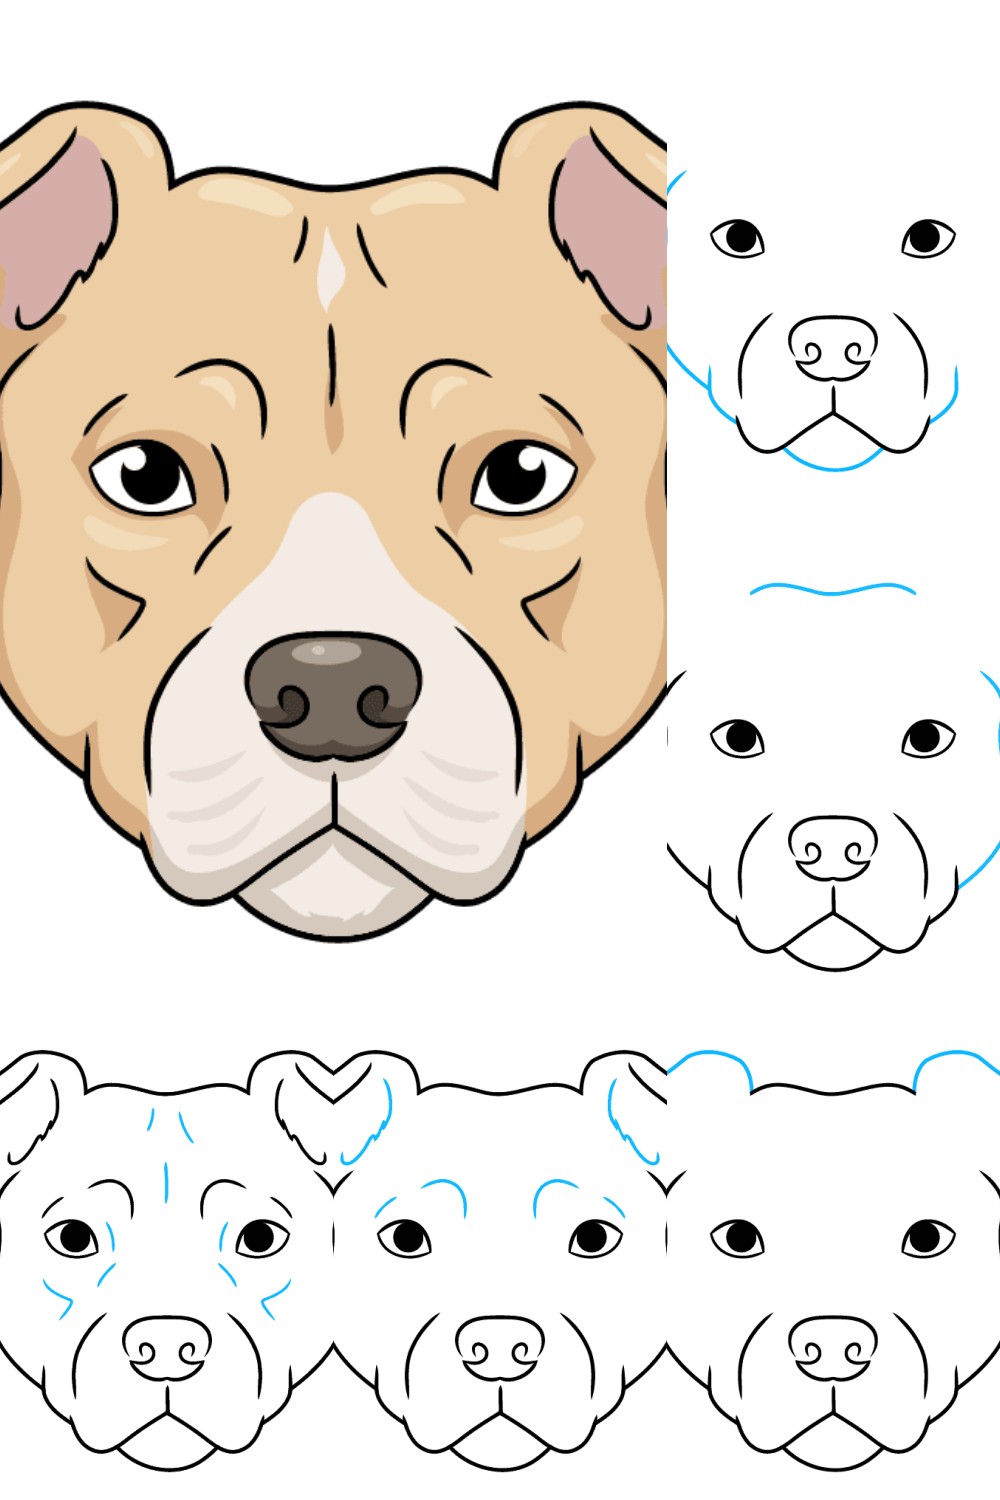 How to Draw a Pitbull Face